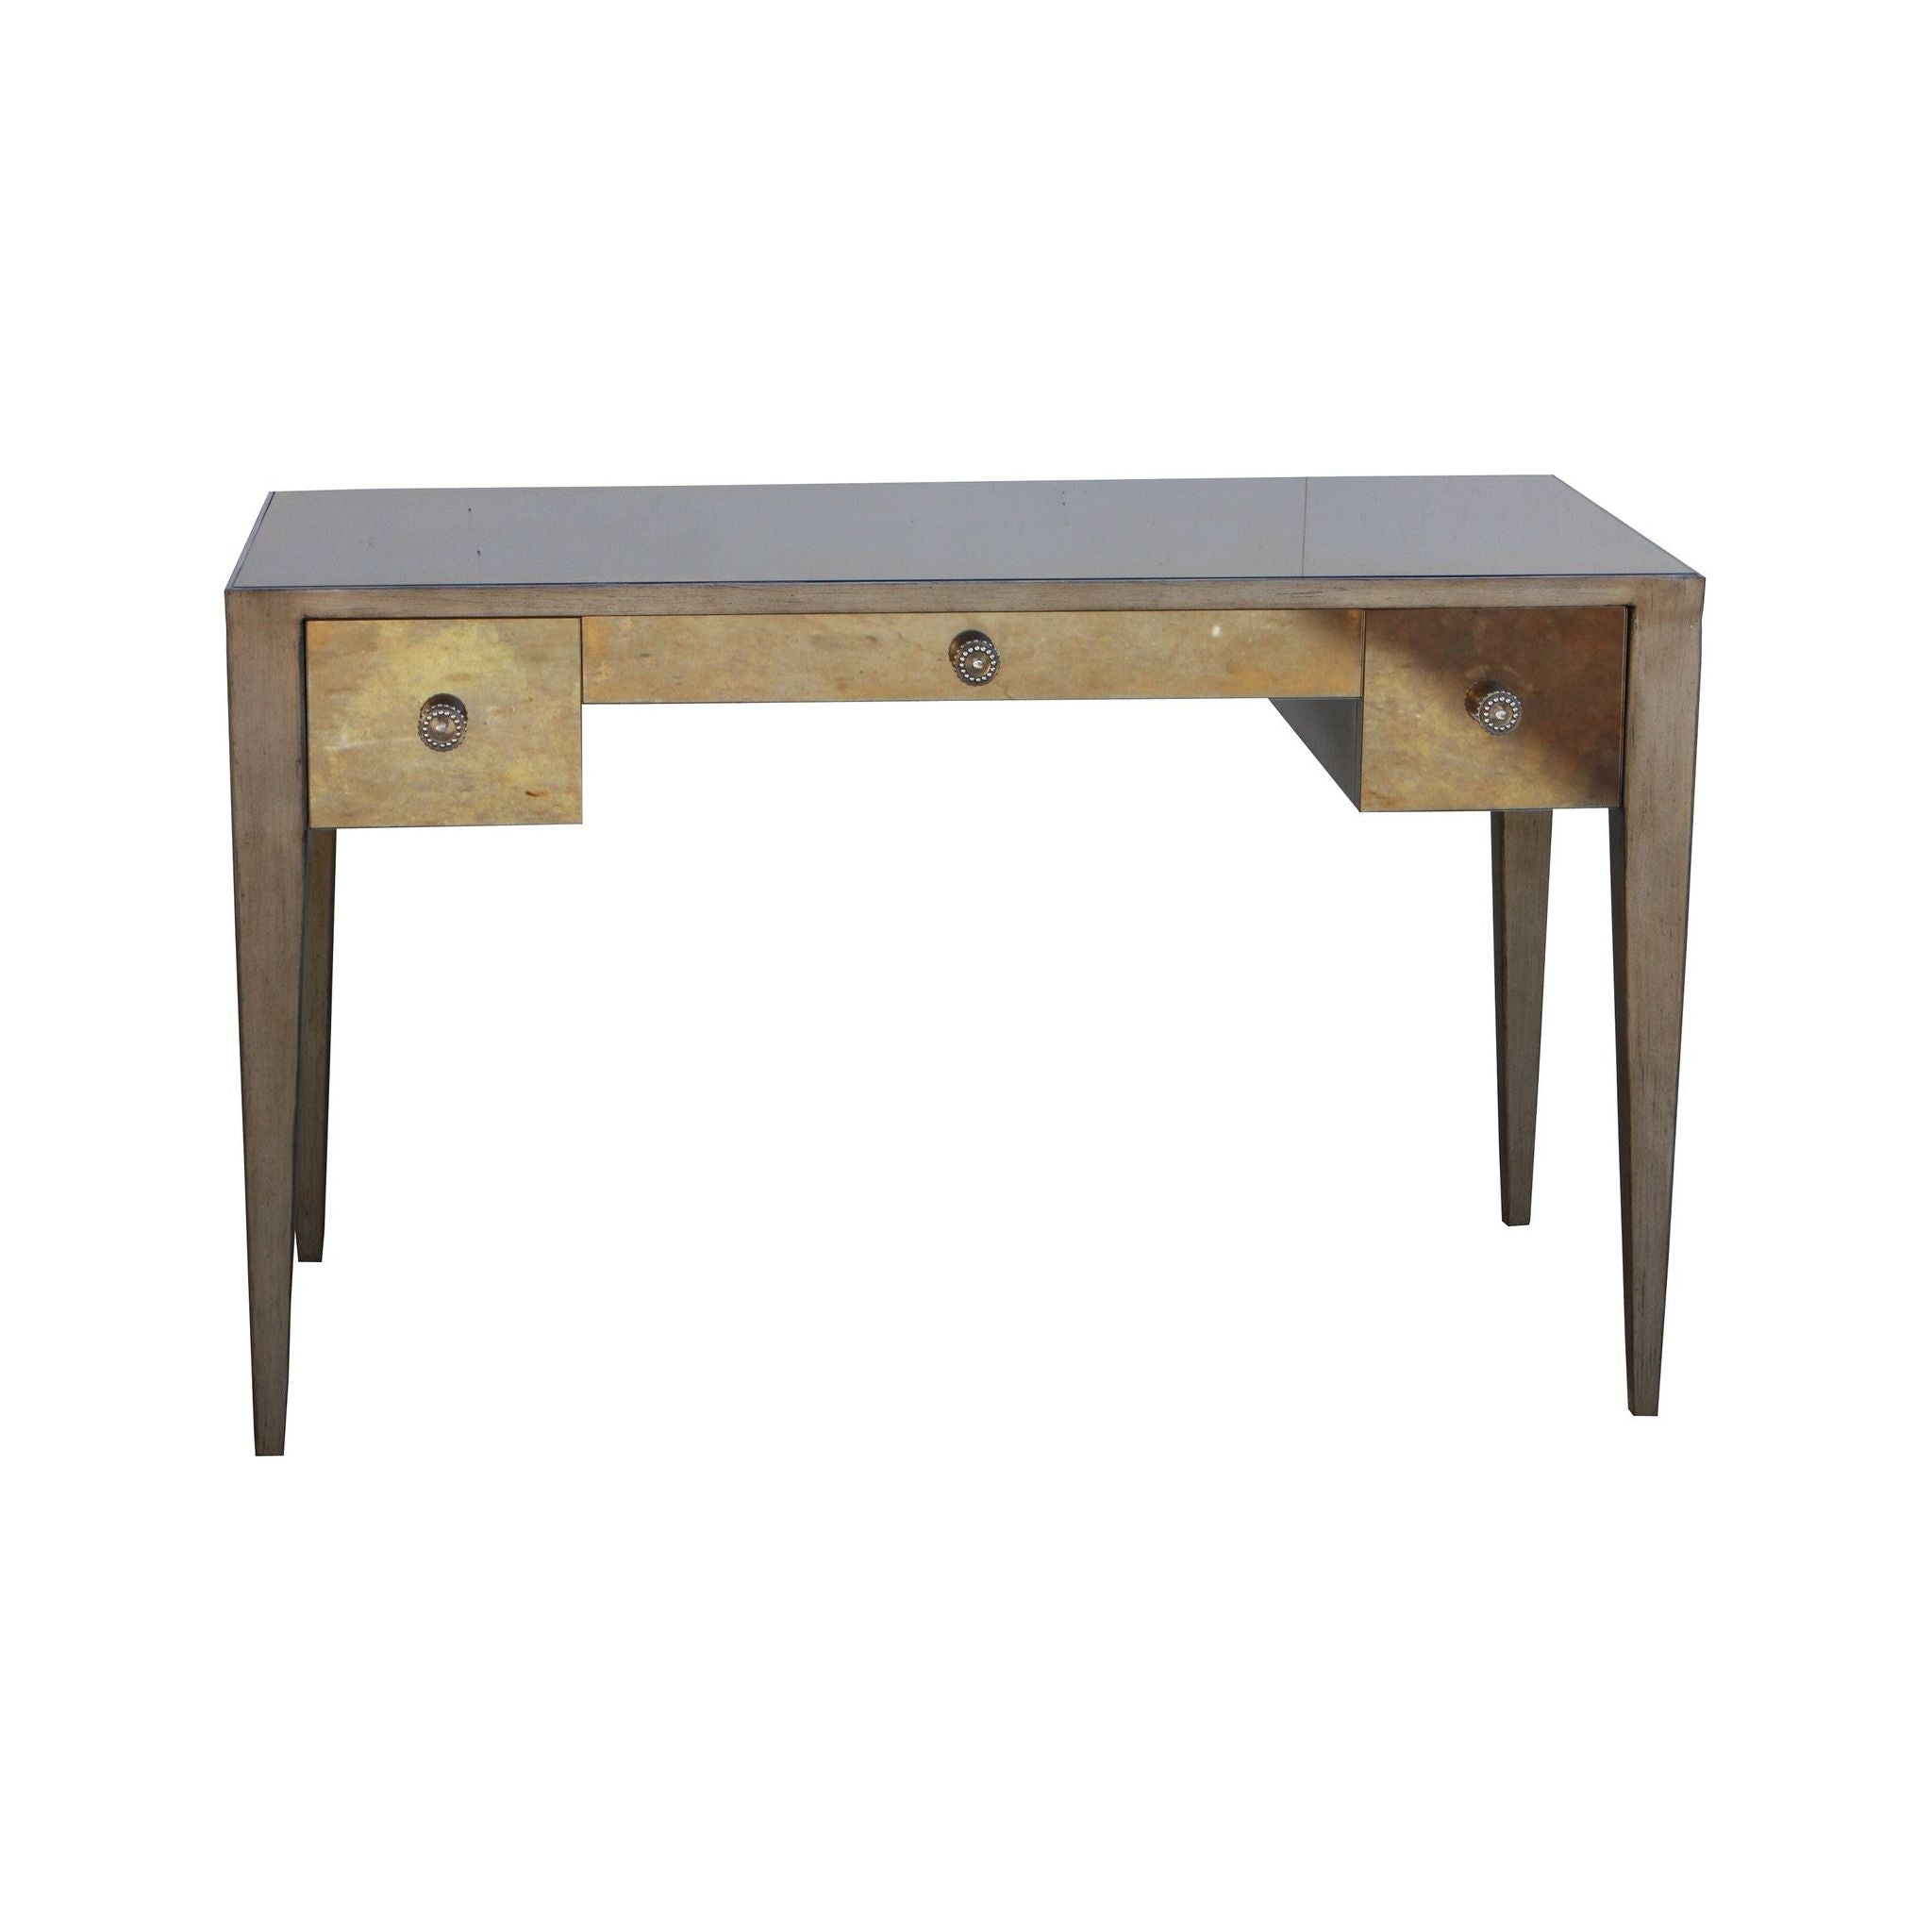 Lindsey Desk with Antique Mirror and Metal Legs